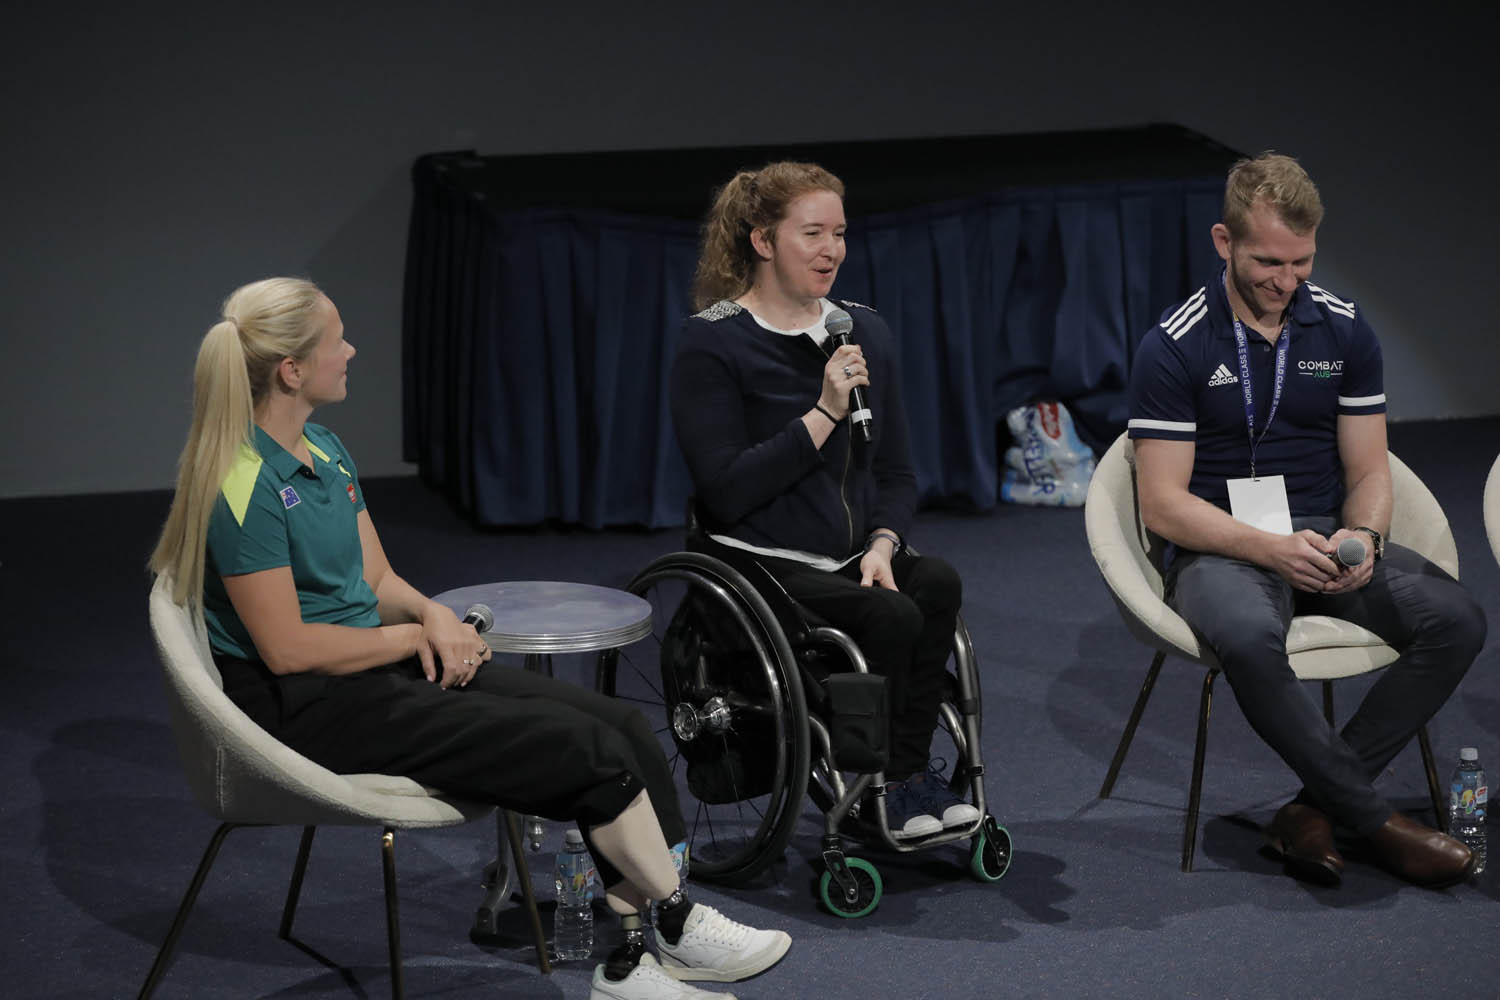 A woman with prosthetic legs, a woman in a wheelchair and a man seated on stage